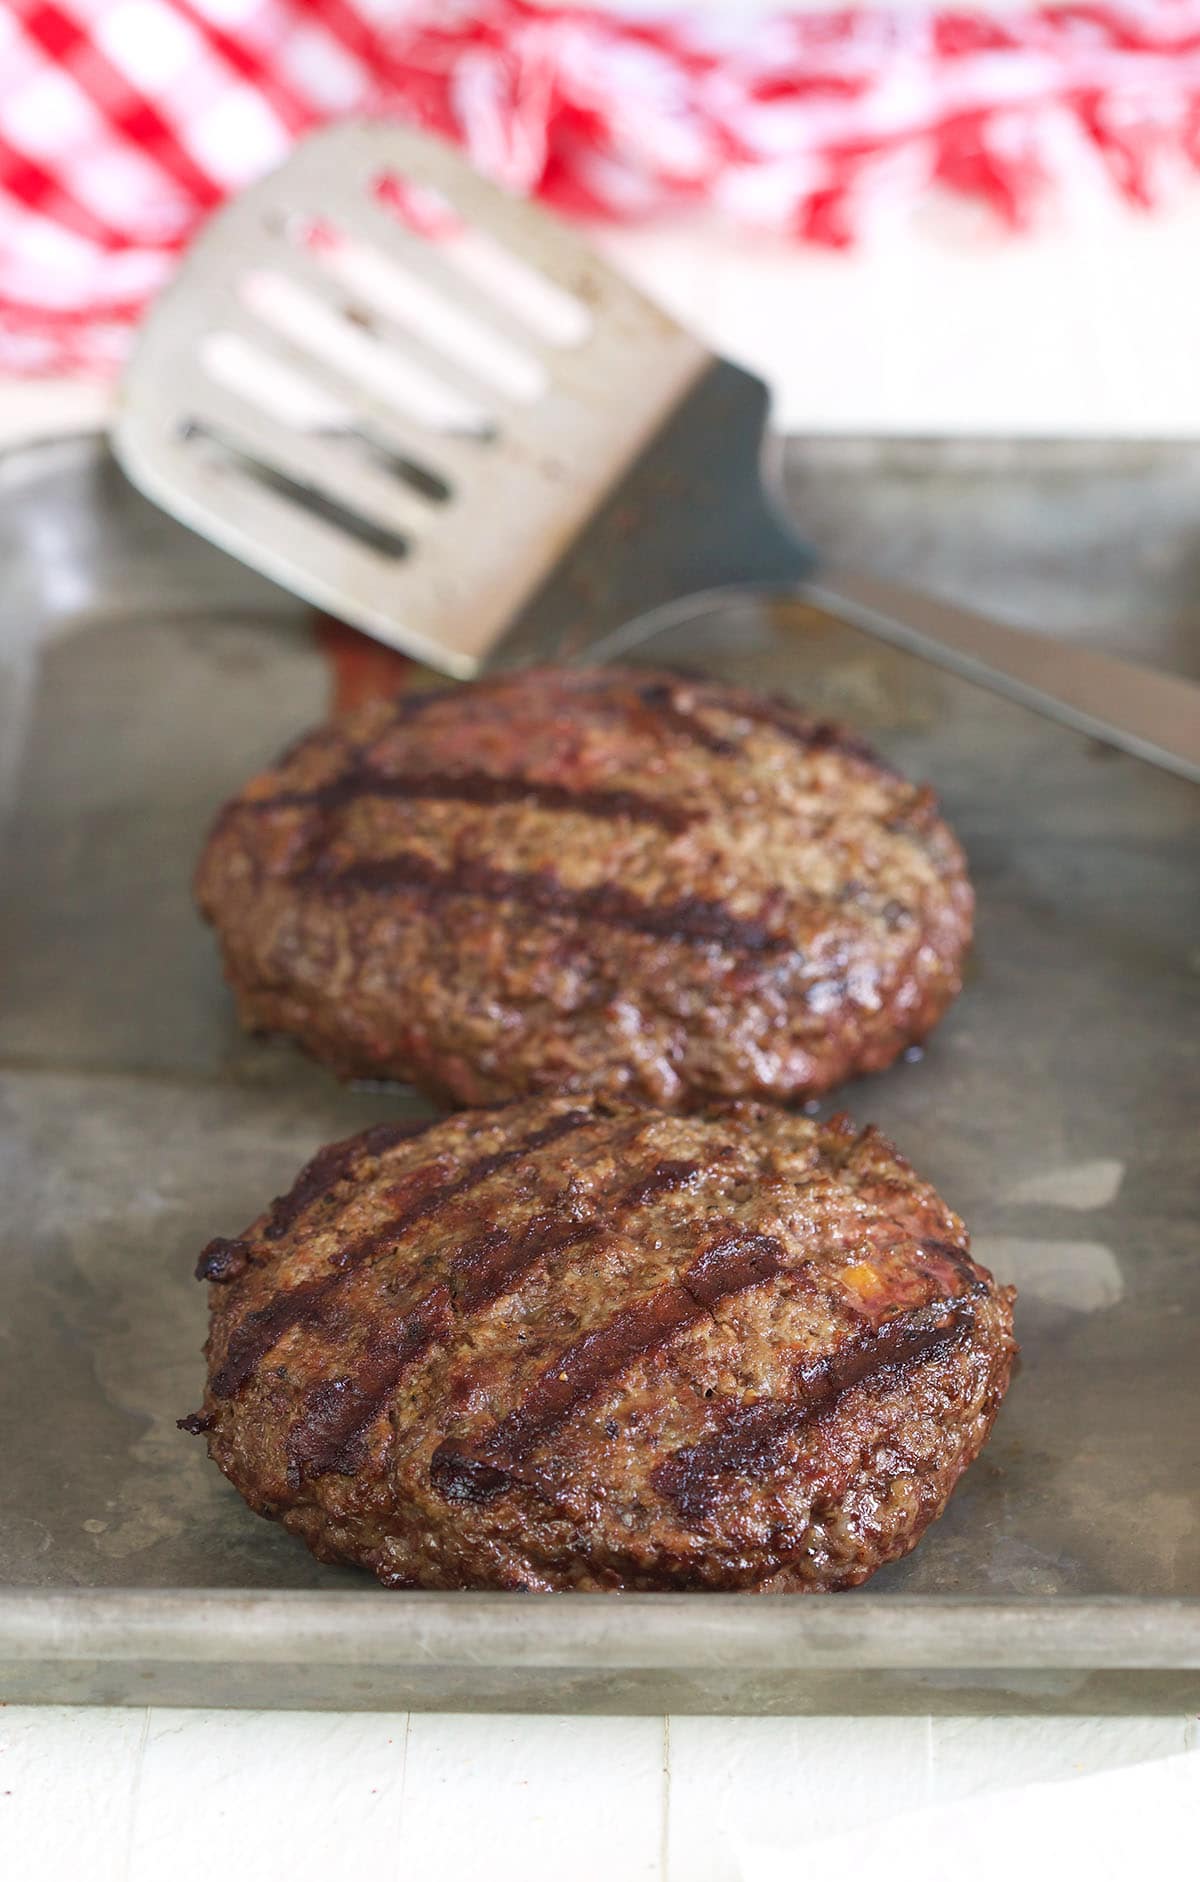 Burgers are fully cooked and placed on a baking sheet.